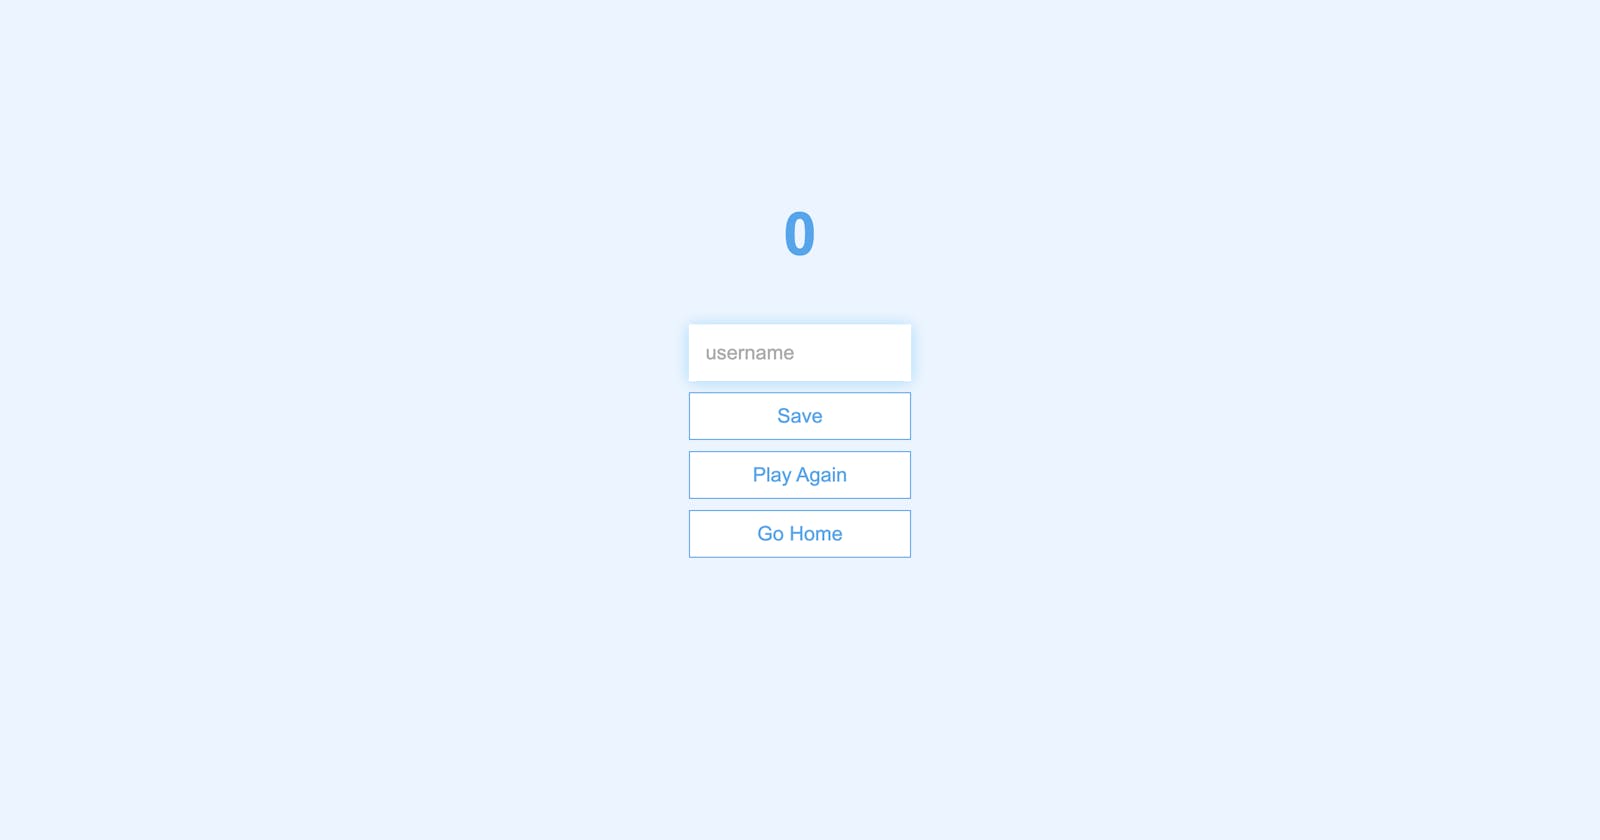 Built a quiz app with HTML, CSS and JAVASCRIPT